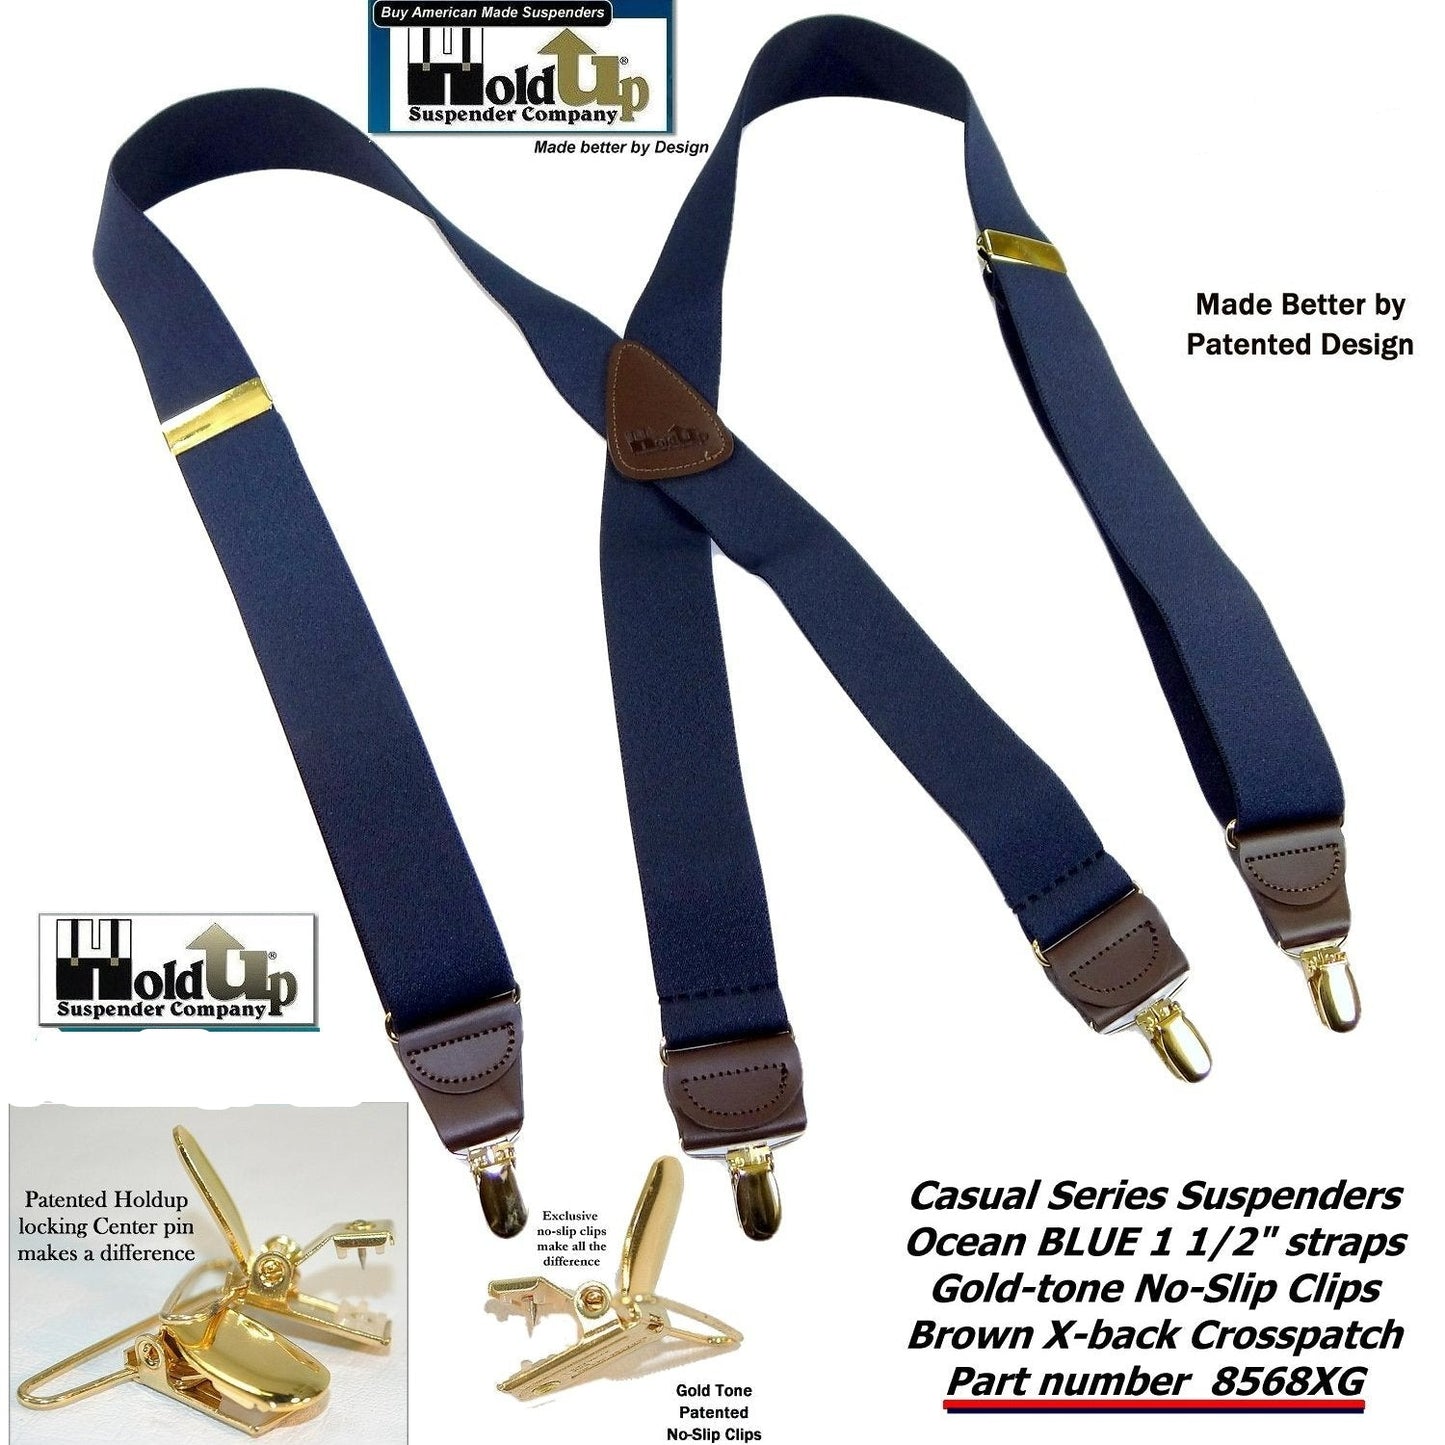 USA Made Holdup Suspenders Dark Ocean Blue 1 1/2" wide X-back Suspenders with Patented No-slip Gold-tone  Clips